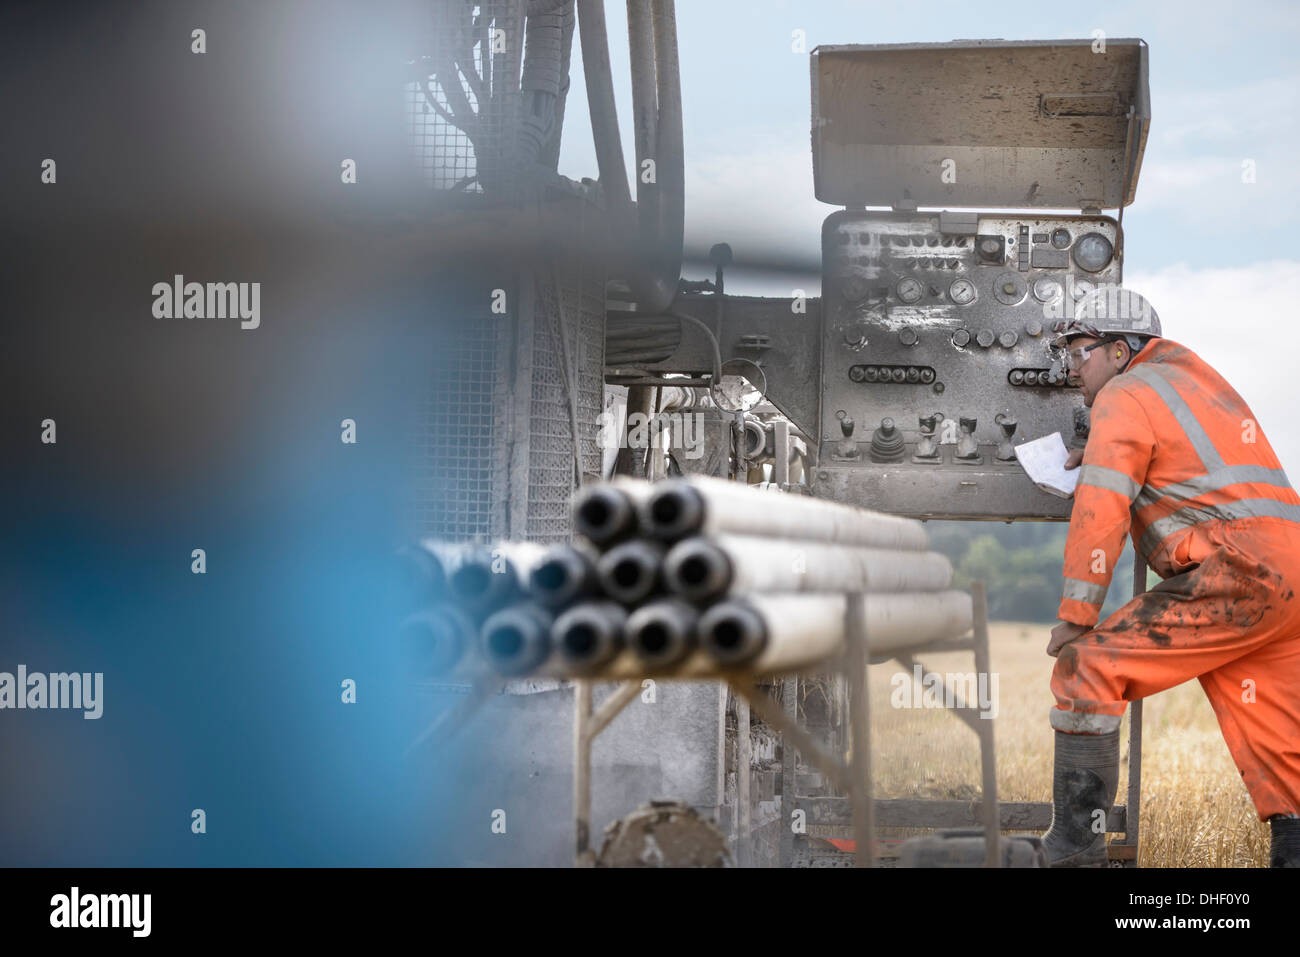 Drilling rig worker inspecting machinery Stock Photo